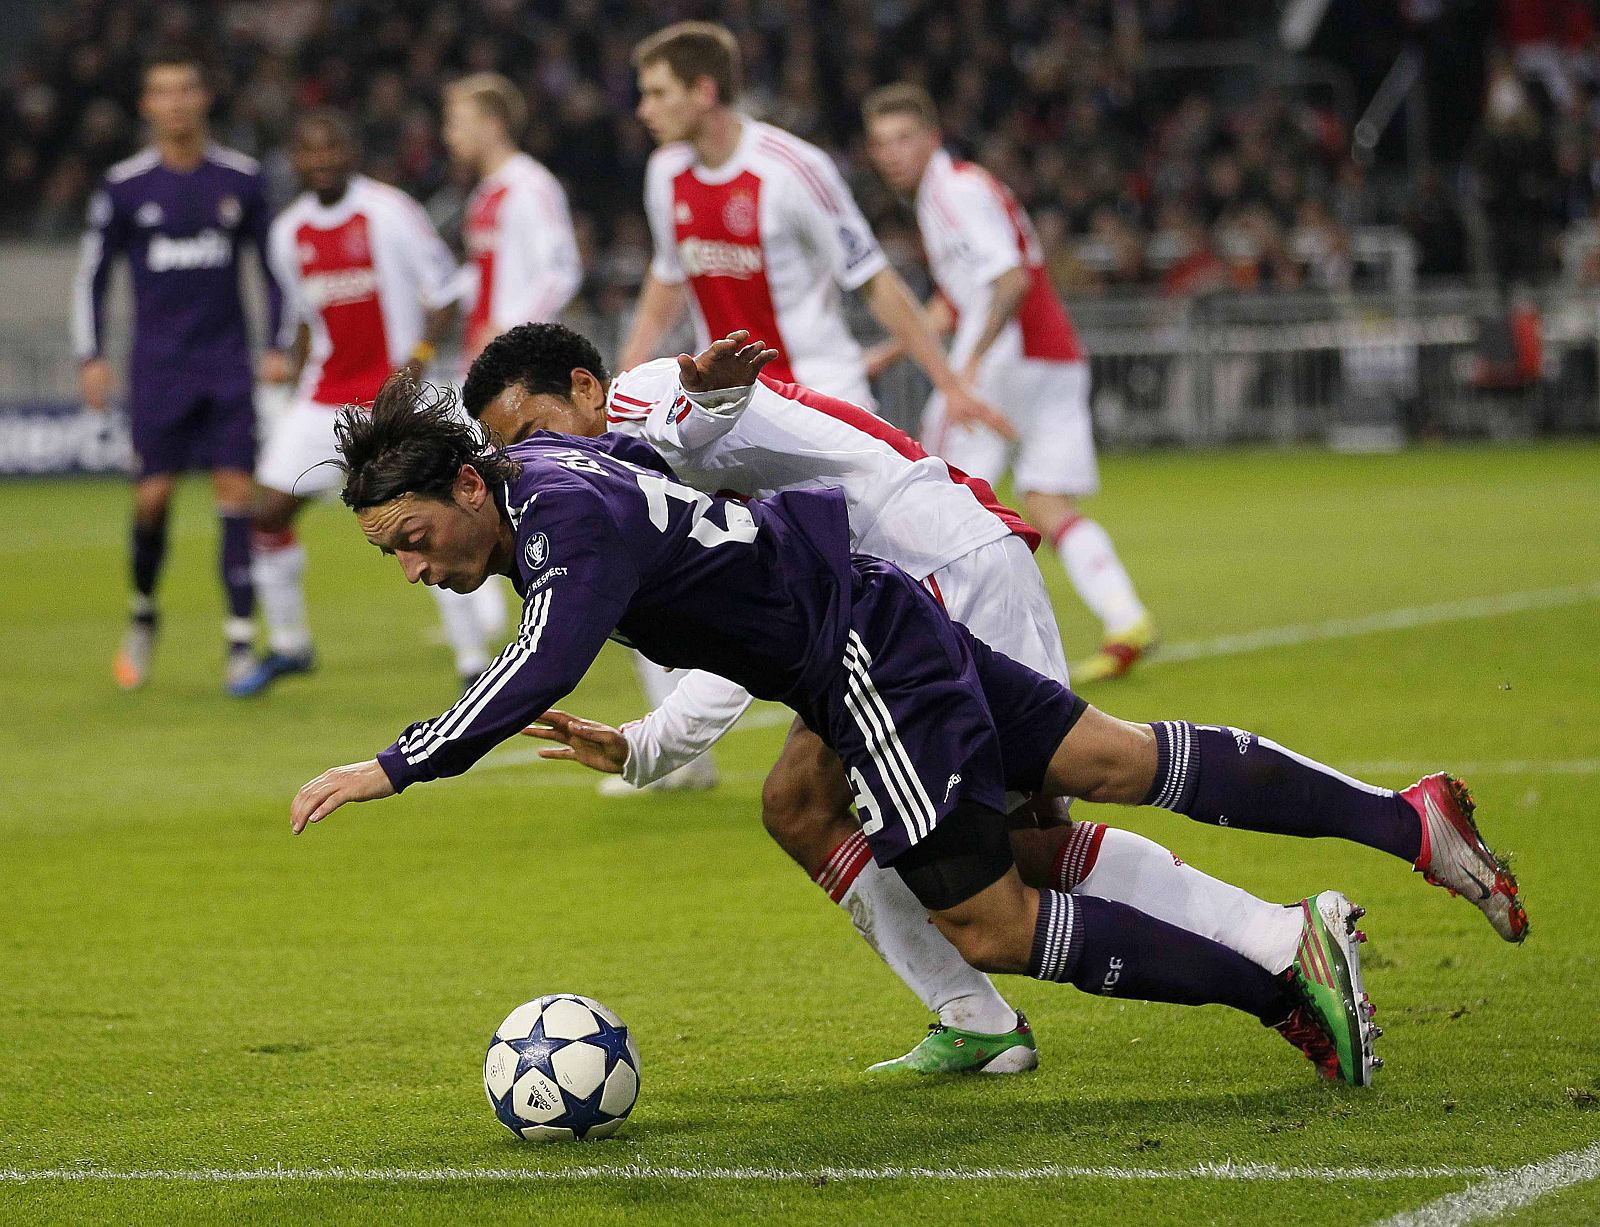 Real Madrid's Ozil is fouled by Ajax Amsterdam's Emanuelson during their Champions League Group G soccer match in Amsterdam